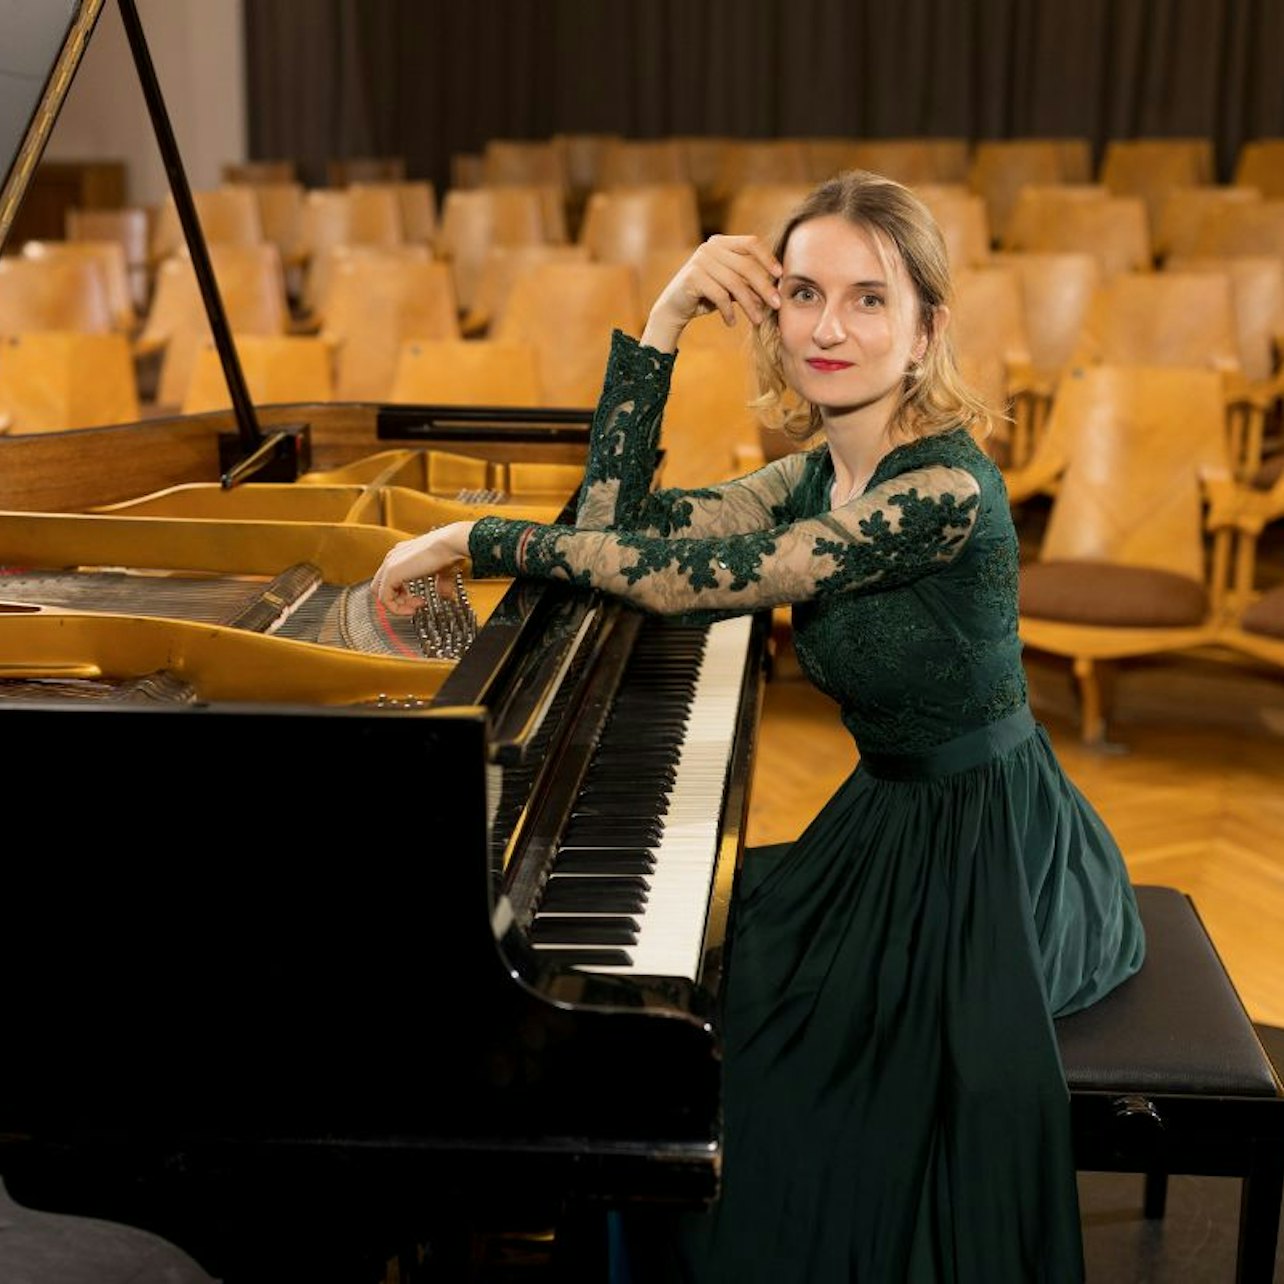 Chopin Piano Concert - Accommodations in Warsaw